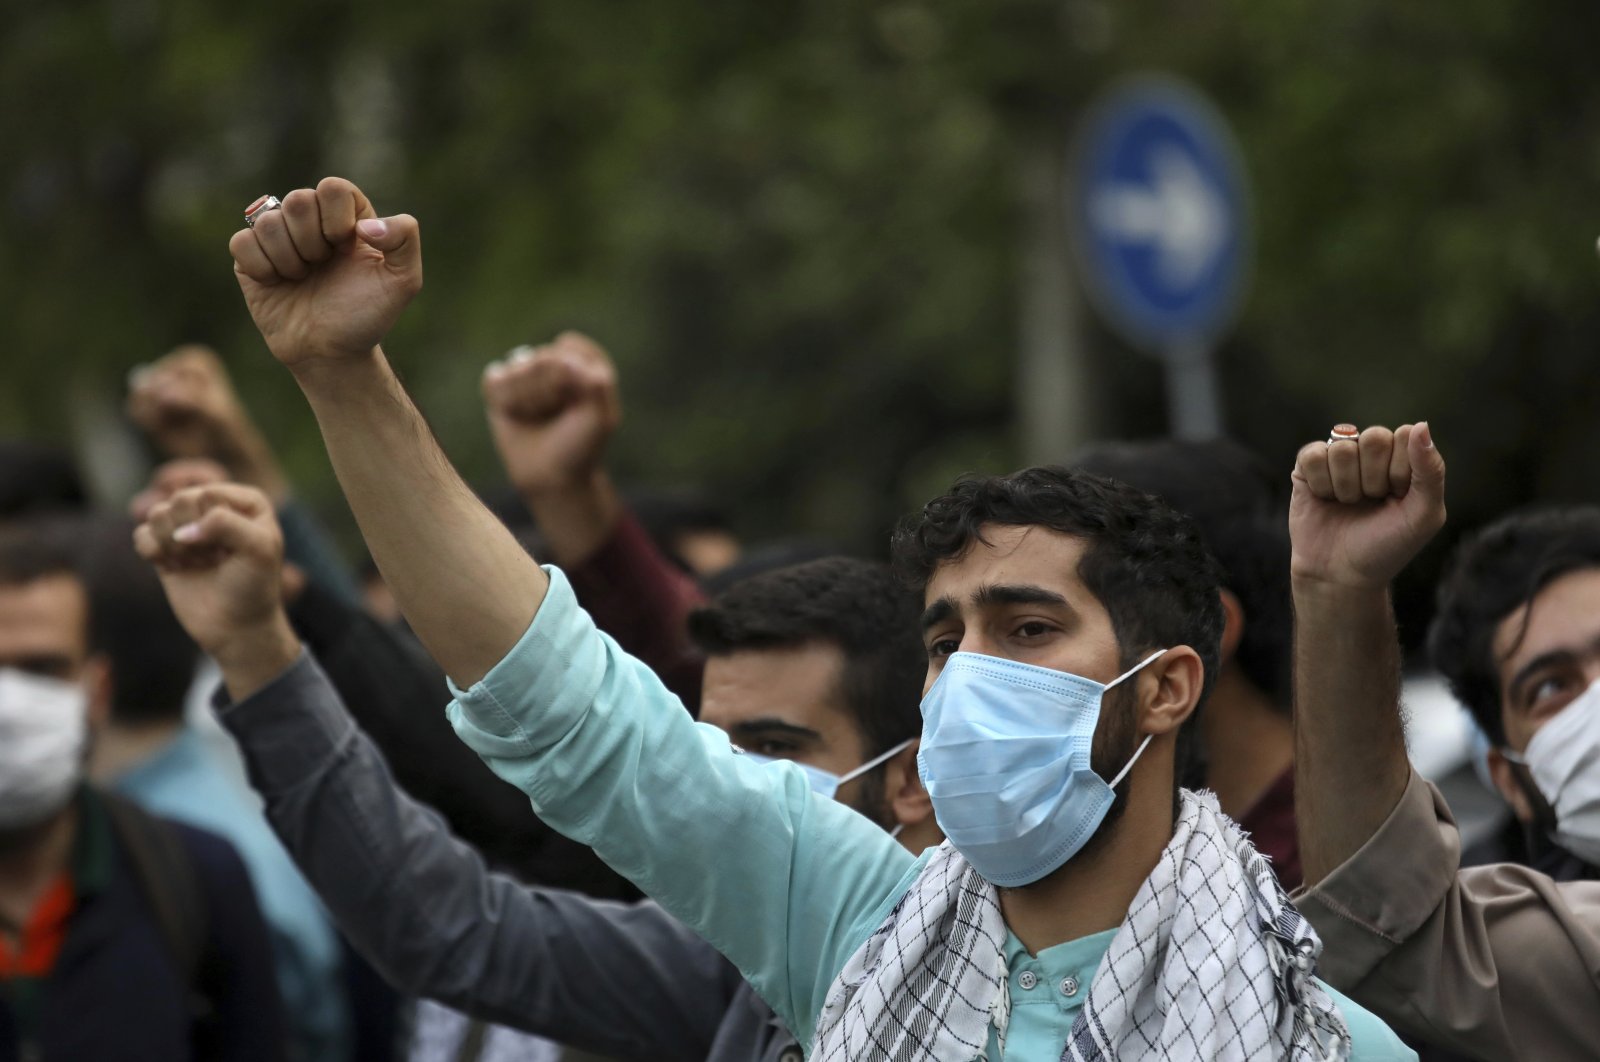 Protesters chant slogans during a demonstration to condemn planned Quran burnings by a right-wing group in Sweden, in front of the Swedish Embassy in Tehran, Iran, Monday, April 18, 2022. (AP)